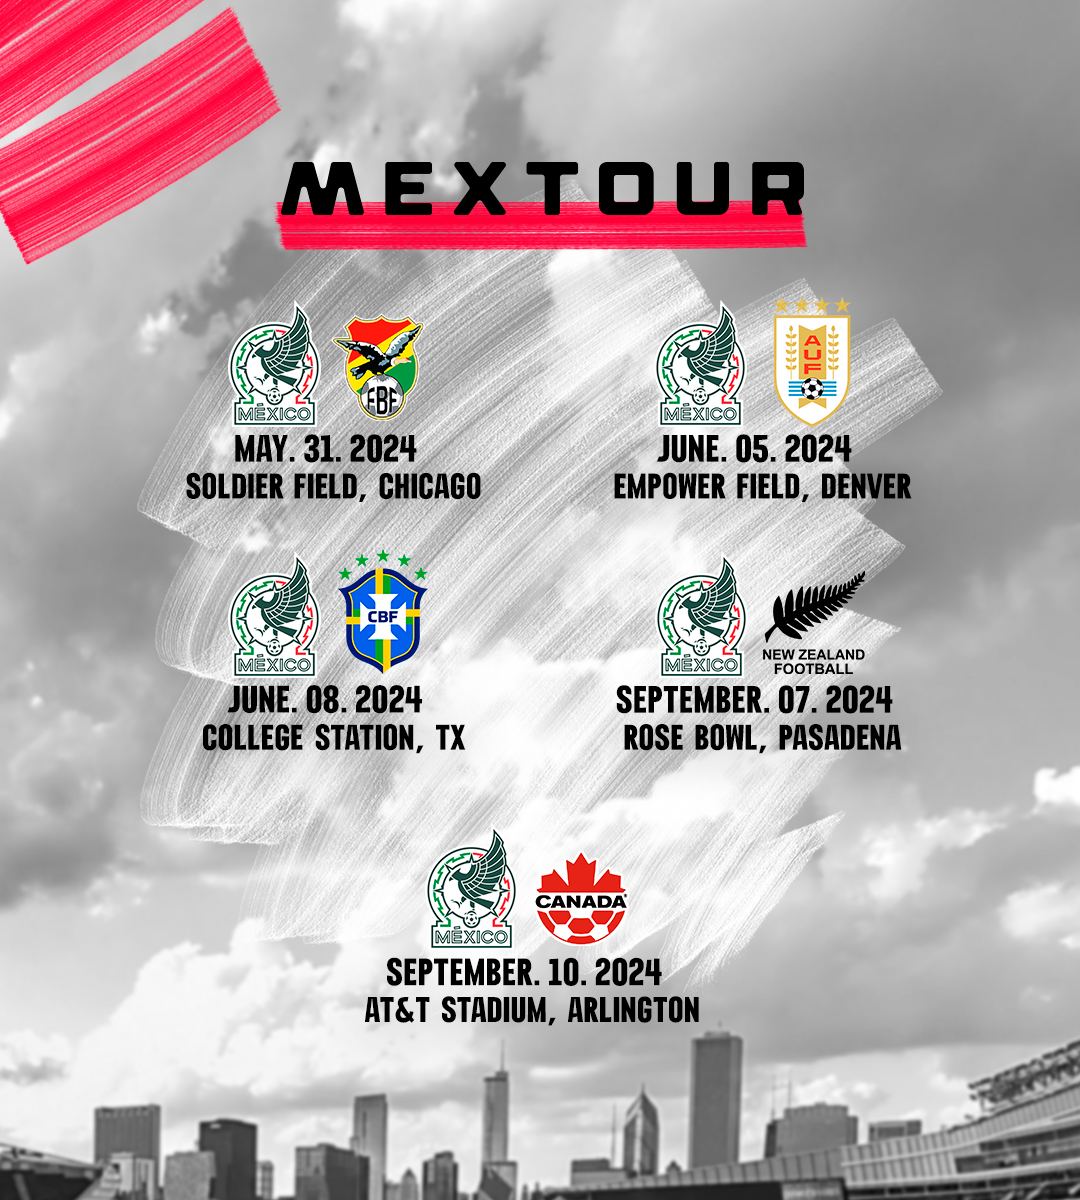 The #MEXTOUR 2024 is here! 🇲🇽🙌

All the dates, opponents & host cities confirmed! 🤩 You ready, Incondicionales?

#VamosTodos #SomosLocales